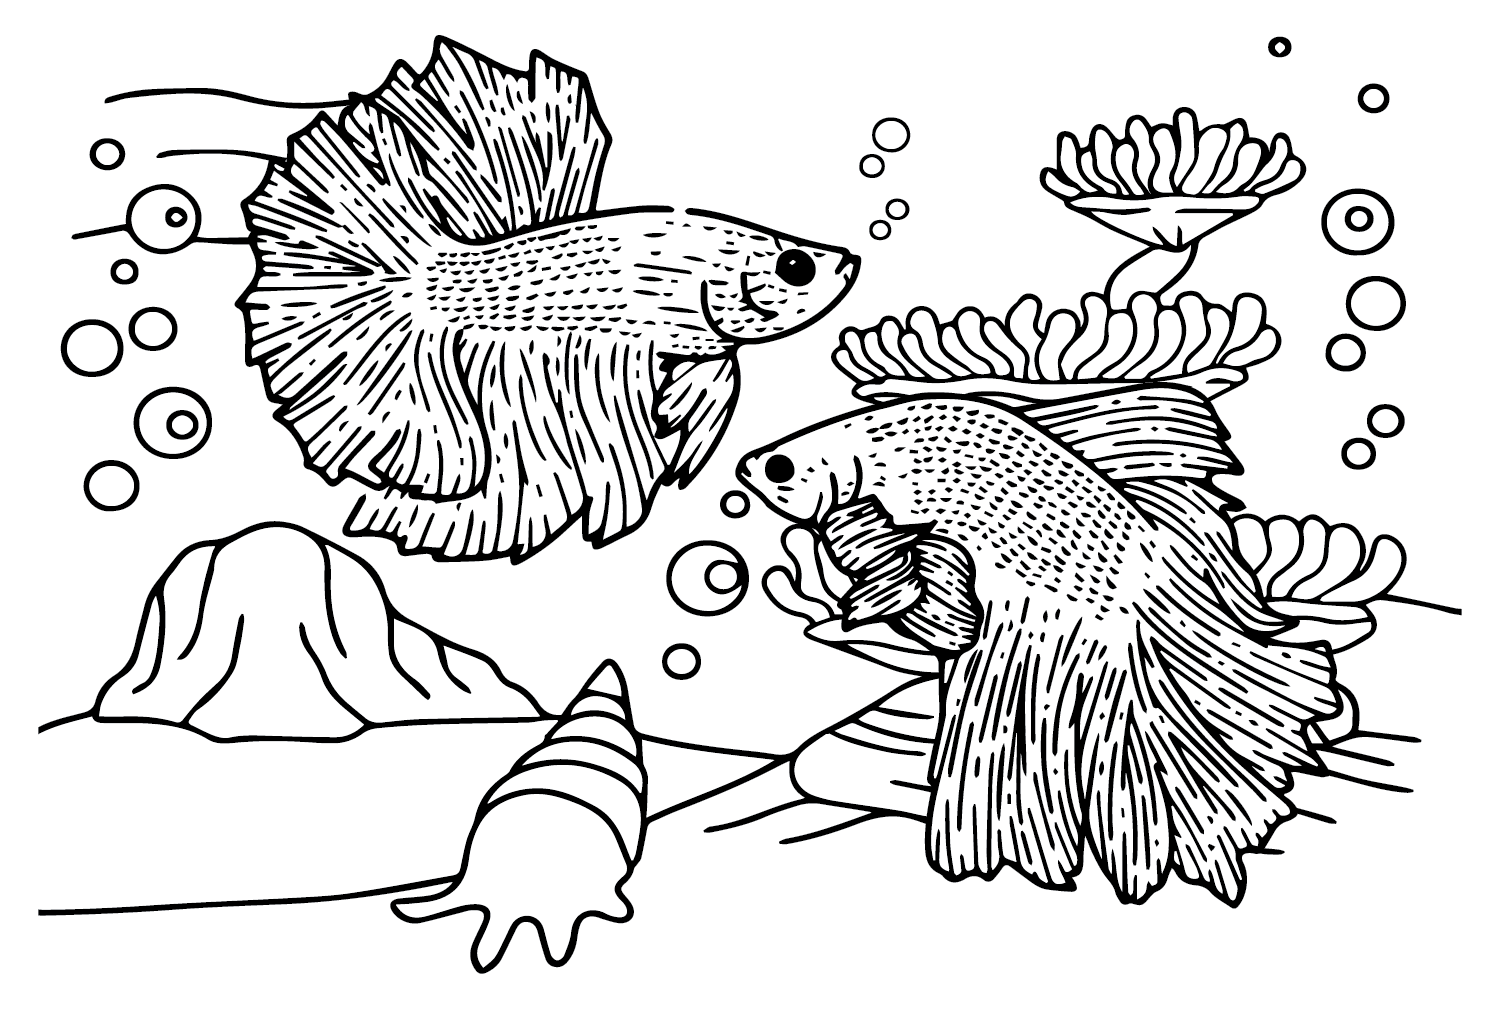 Betta Fish to Download Coloring Page - Free Printable Coloring Pages